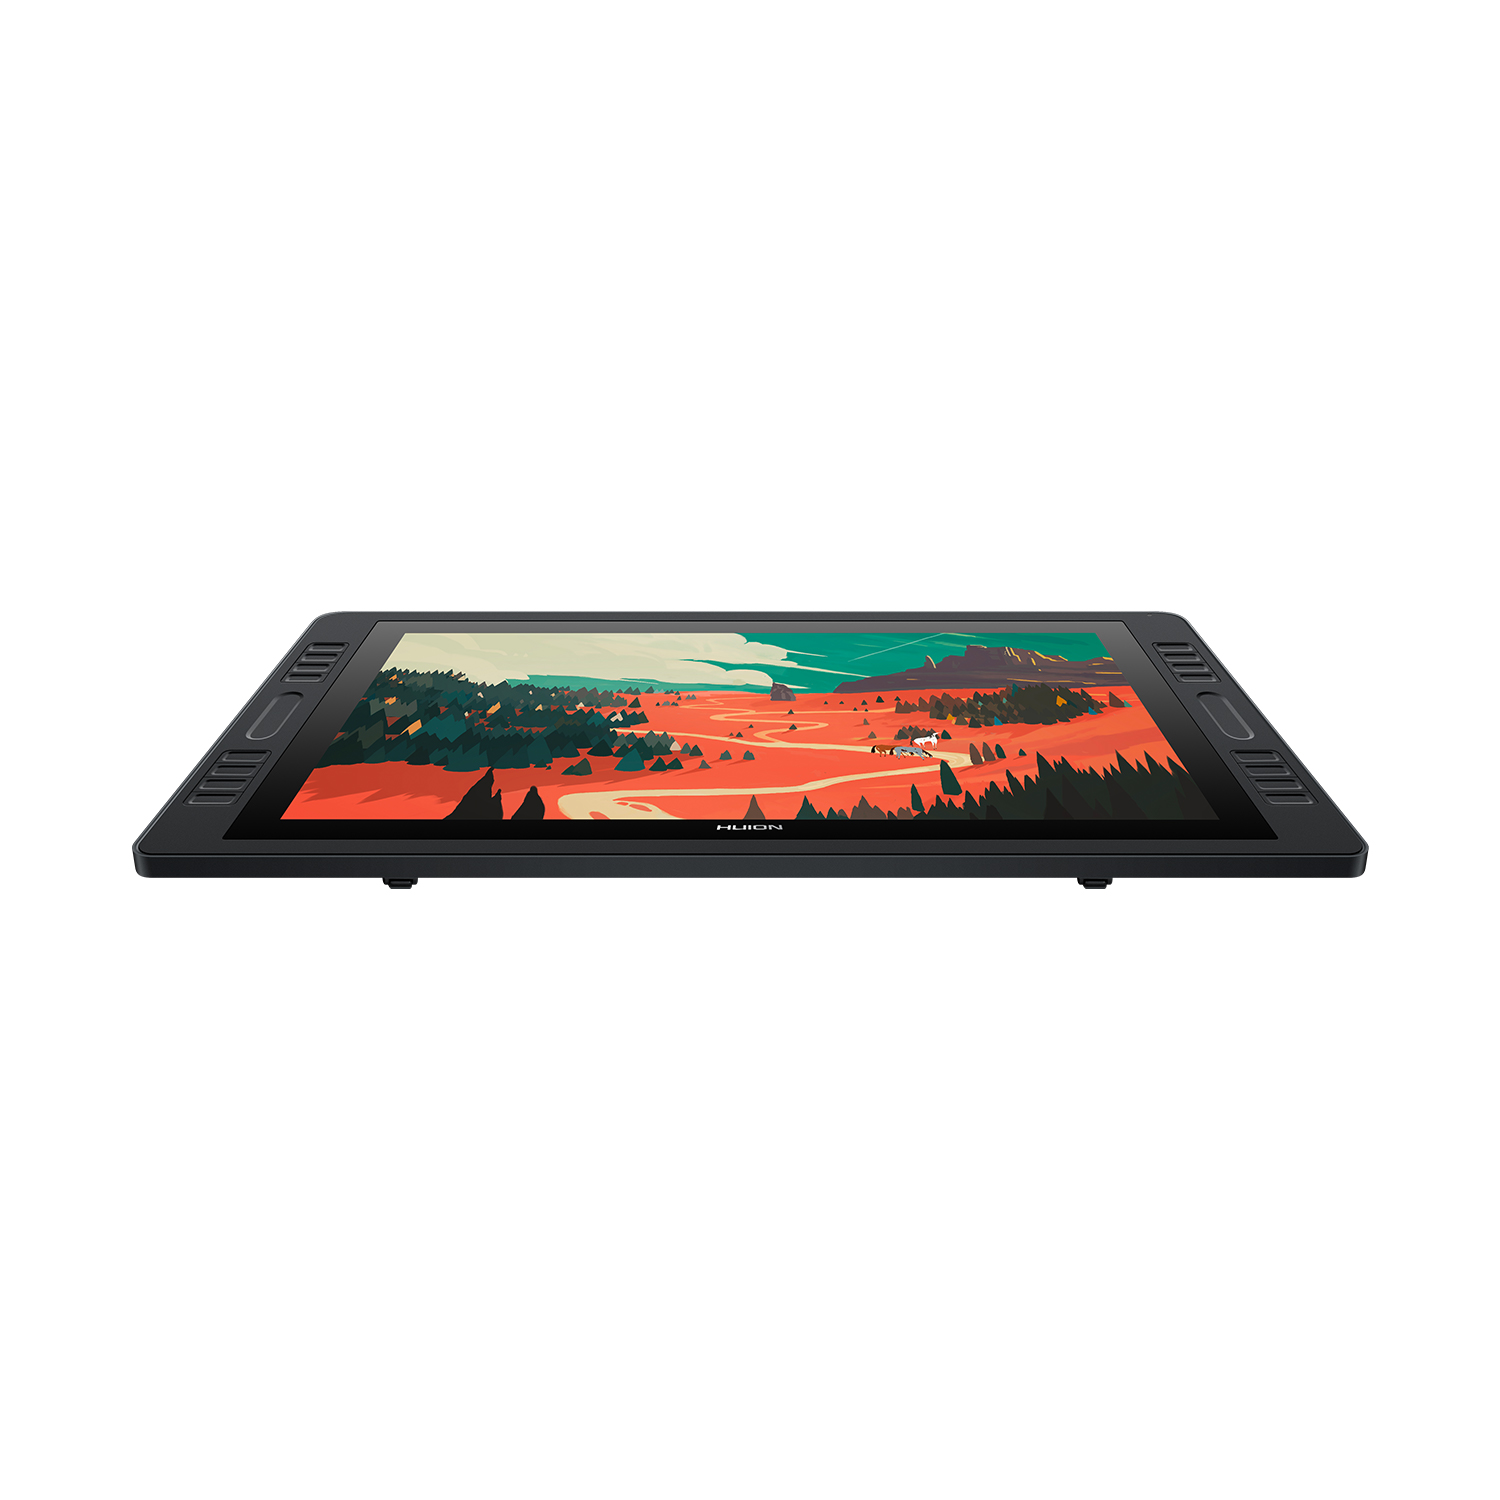 Kamvas Pro 20 (2019) 19.1-inch Graphic Monitor | Huion Official 